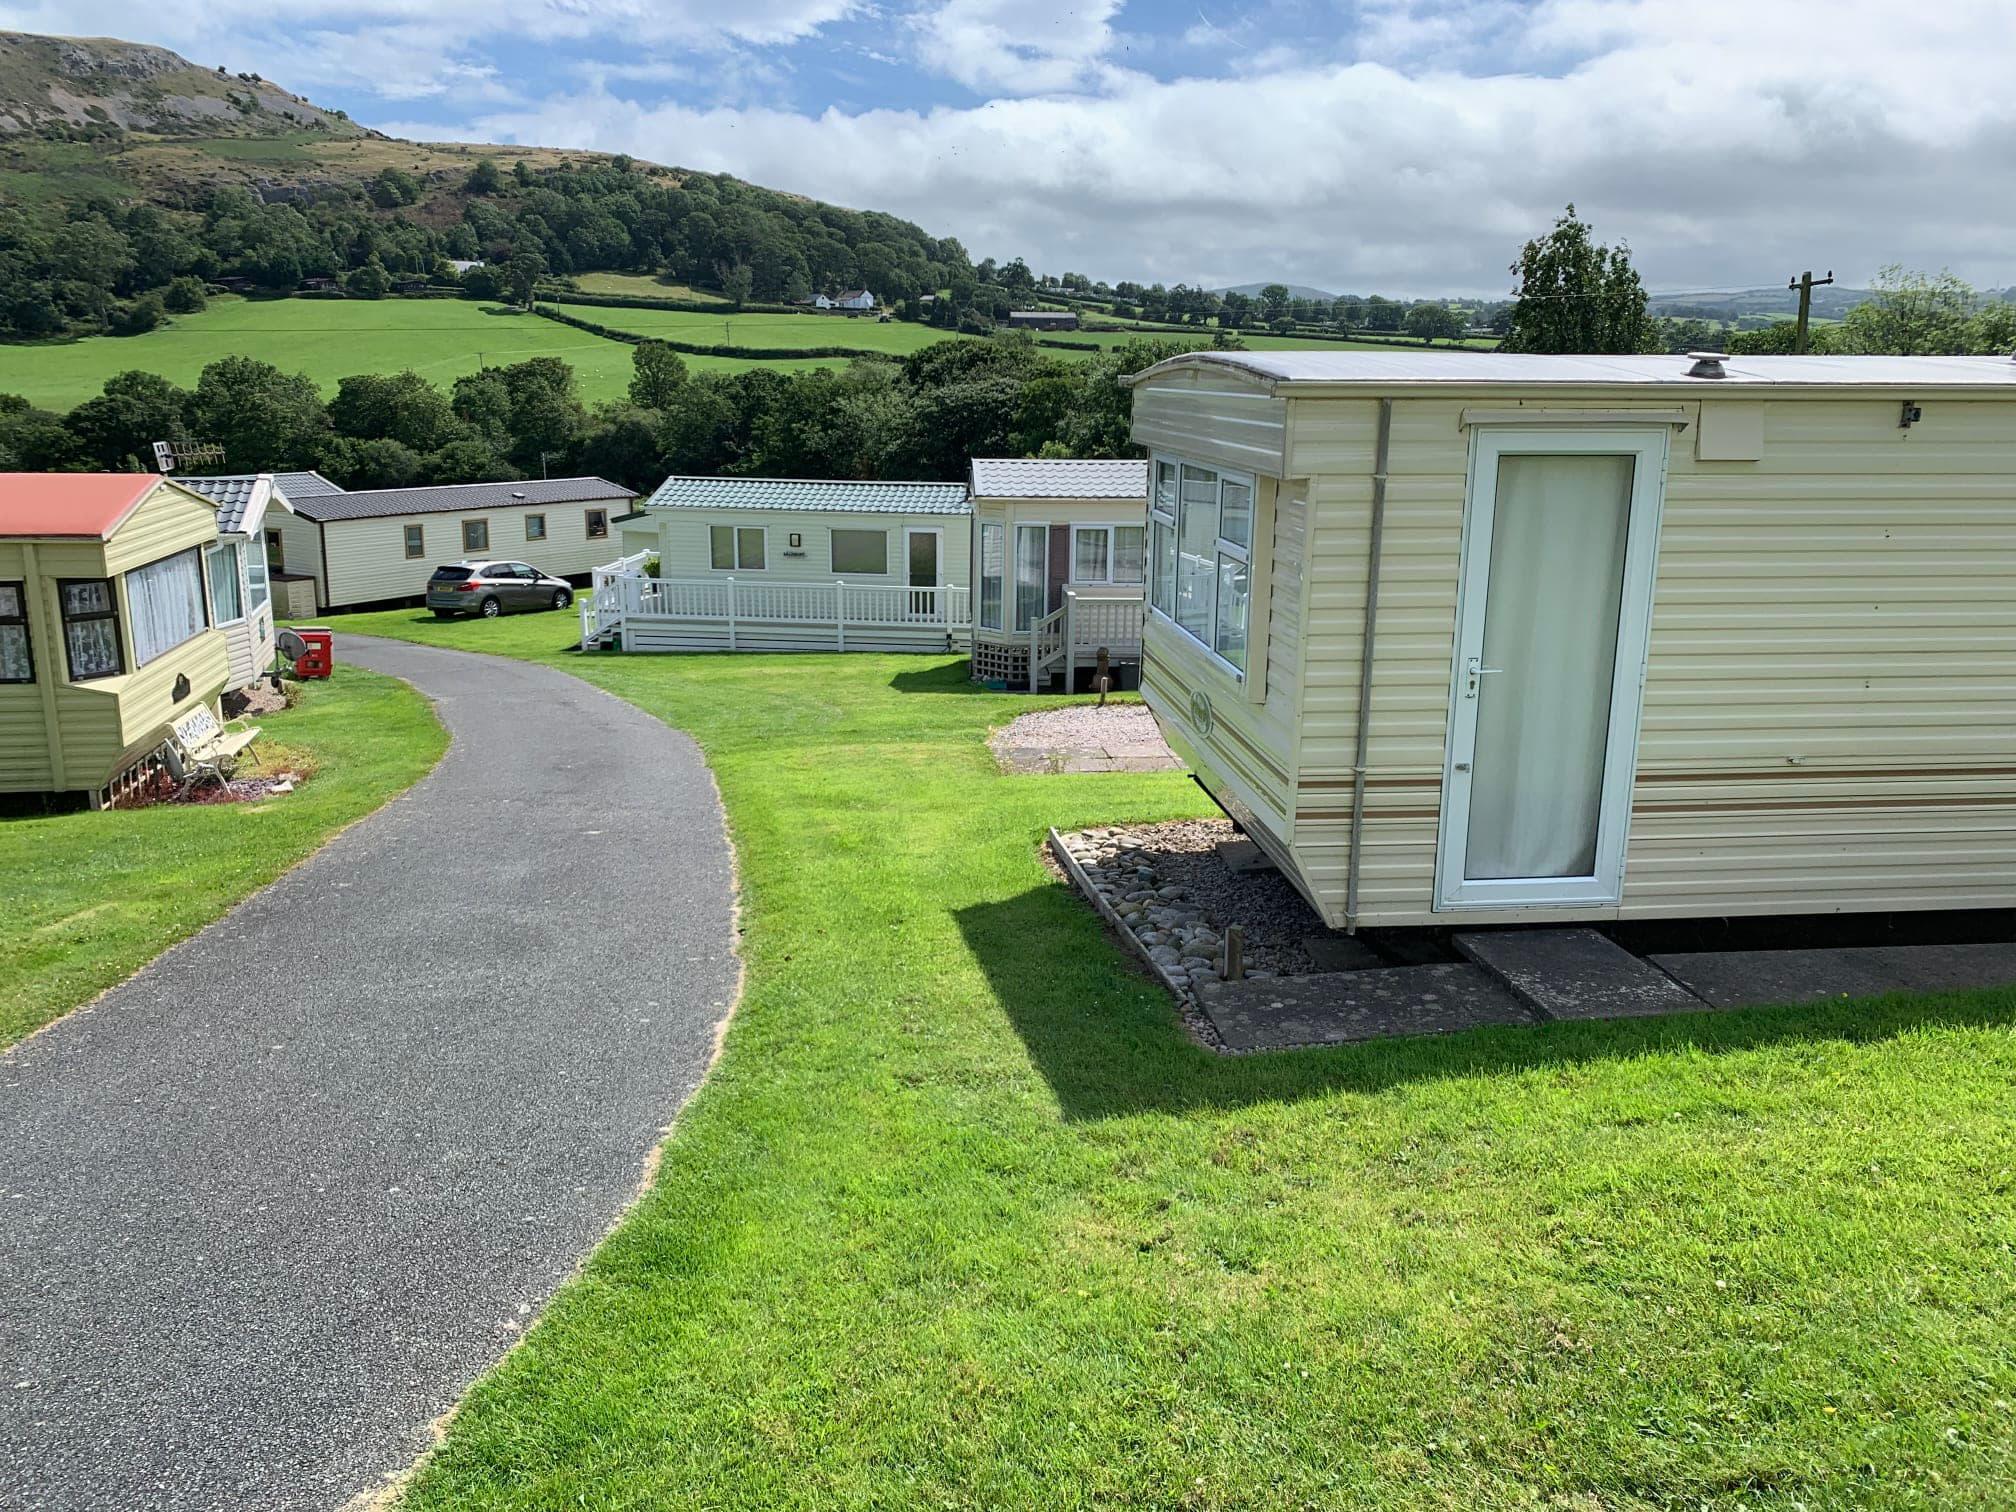 Images Plas Newydd Holiday Home Park